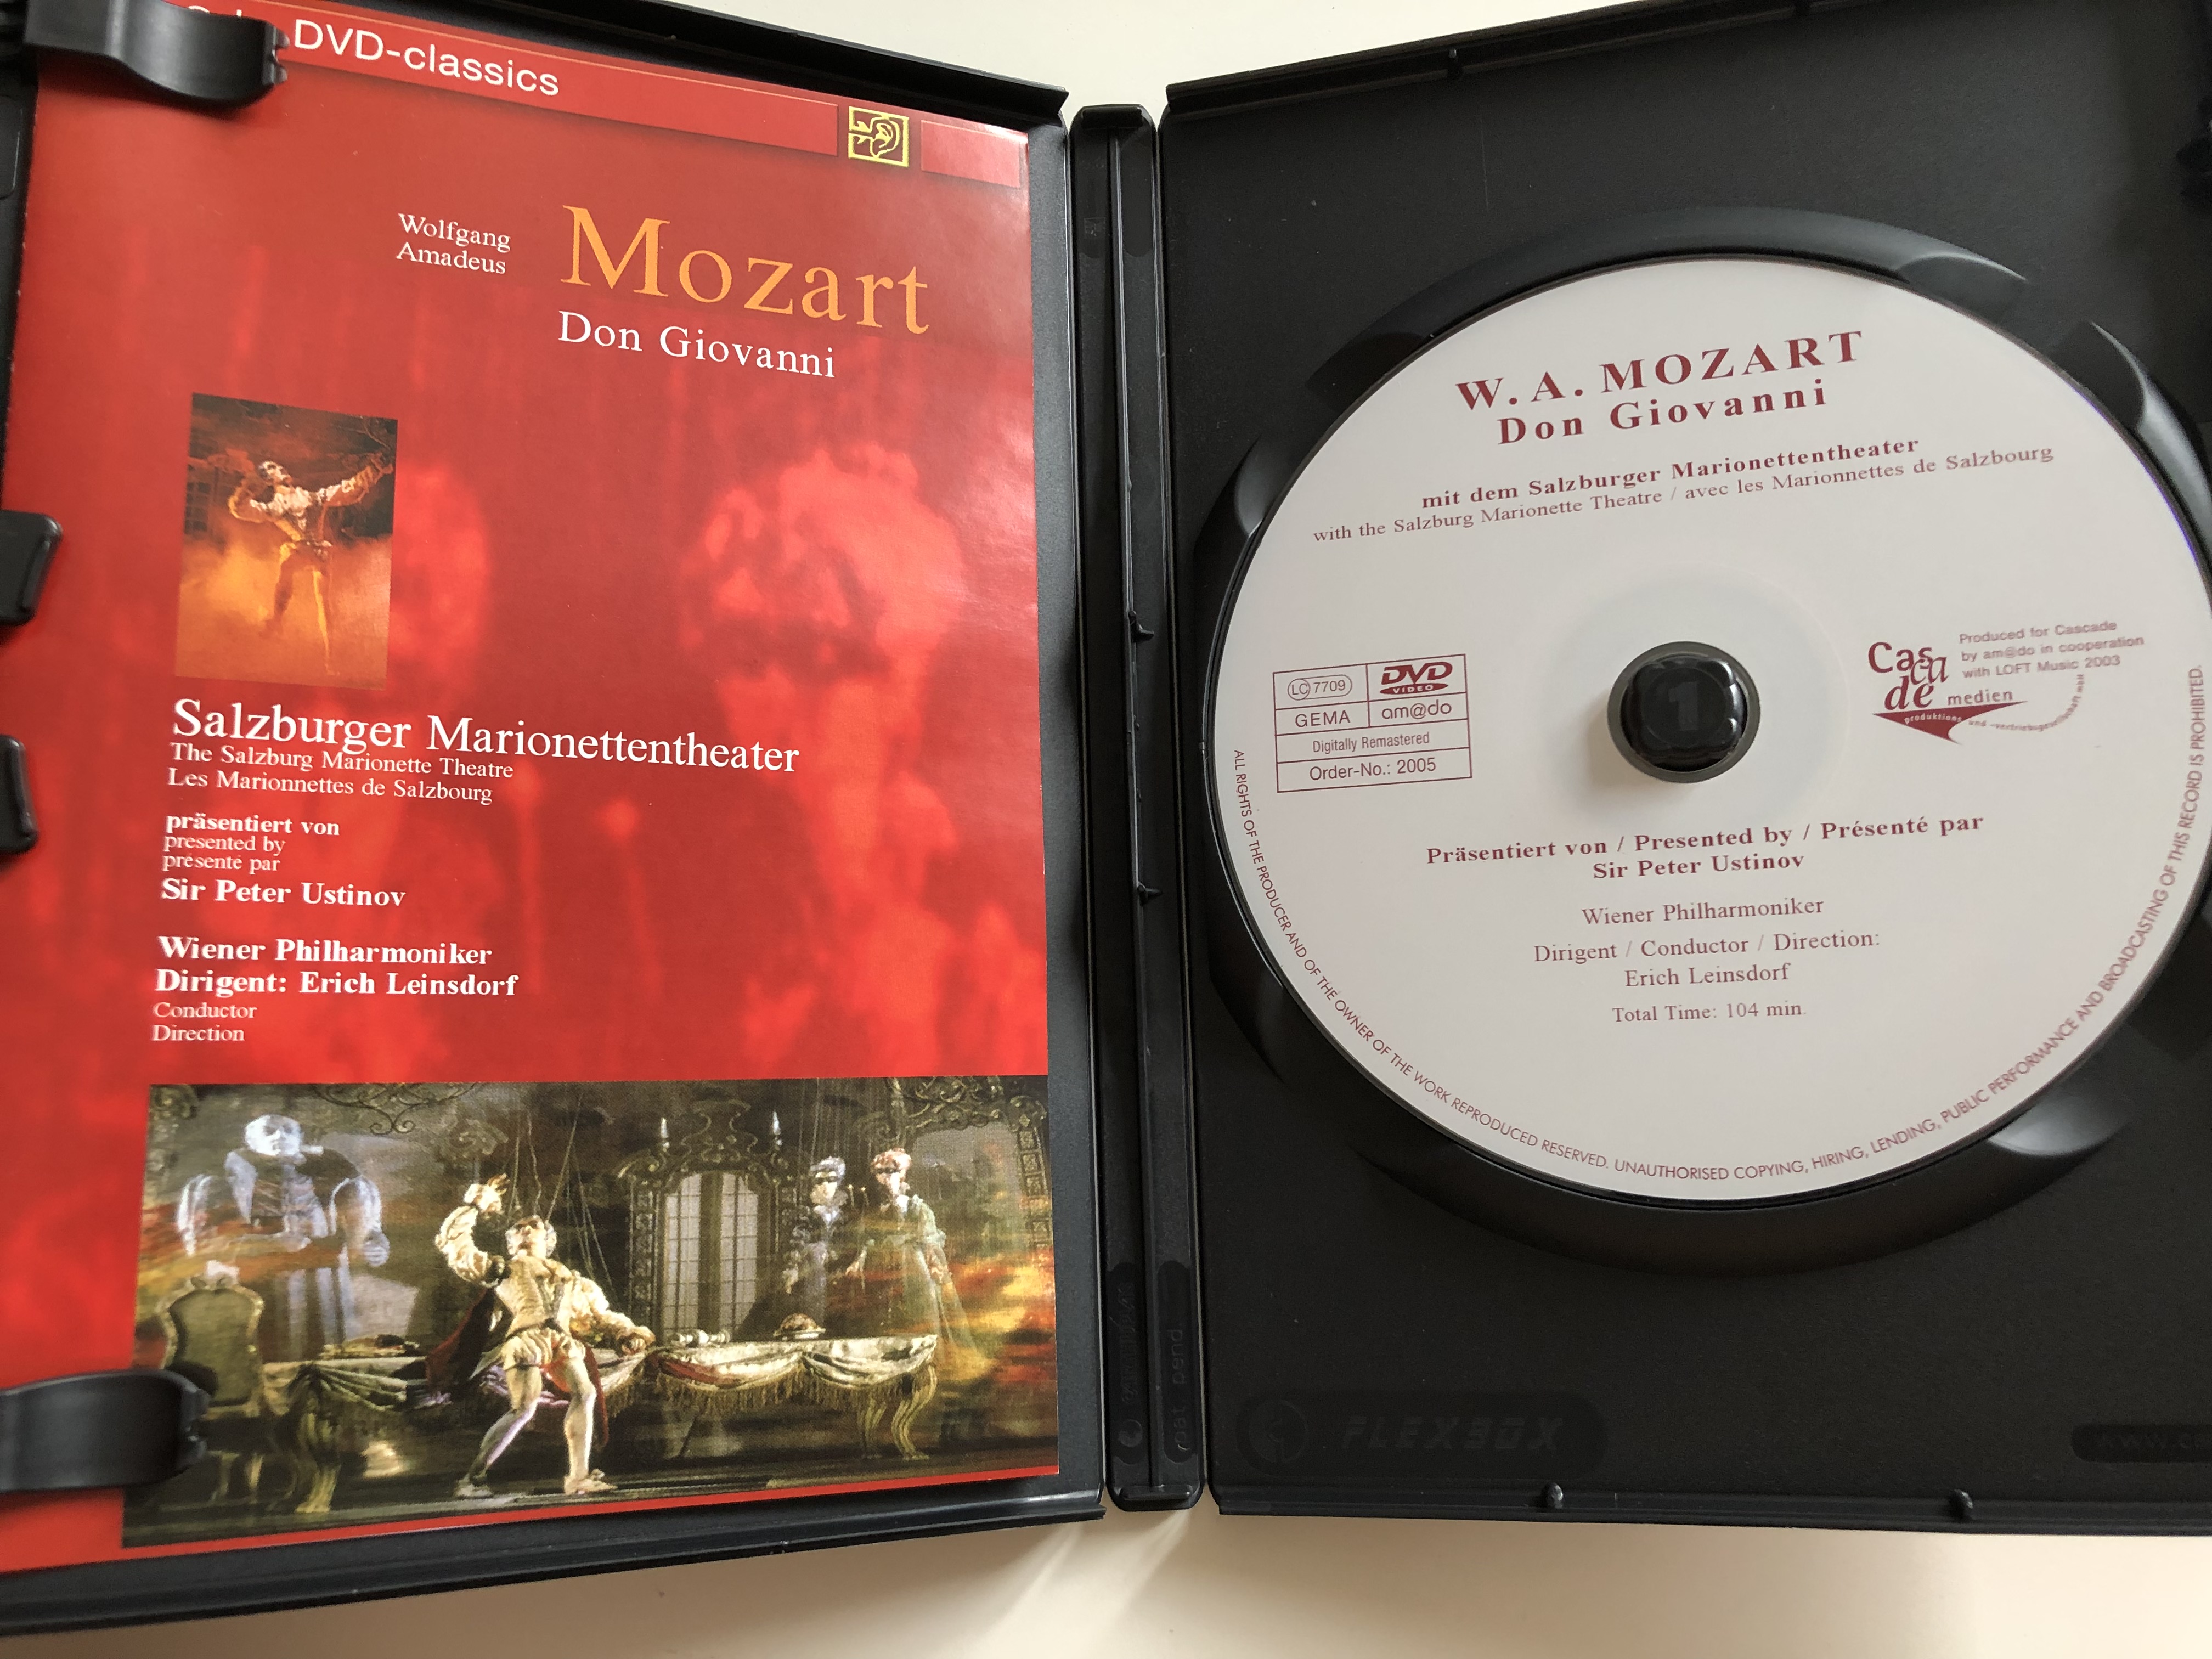 w.a.-mozart-don-giovanni-dvd-2003-directed-by-georg-w-bbolt-text-and-narration-by-sir-peter-ustinov-the-salzburg-marionette-theatre-wiener-philharmoniker-conducted-by-erich-leinsdorf-2-.jpg